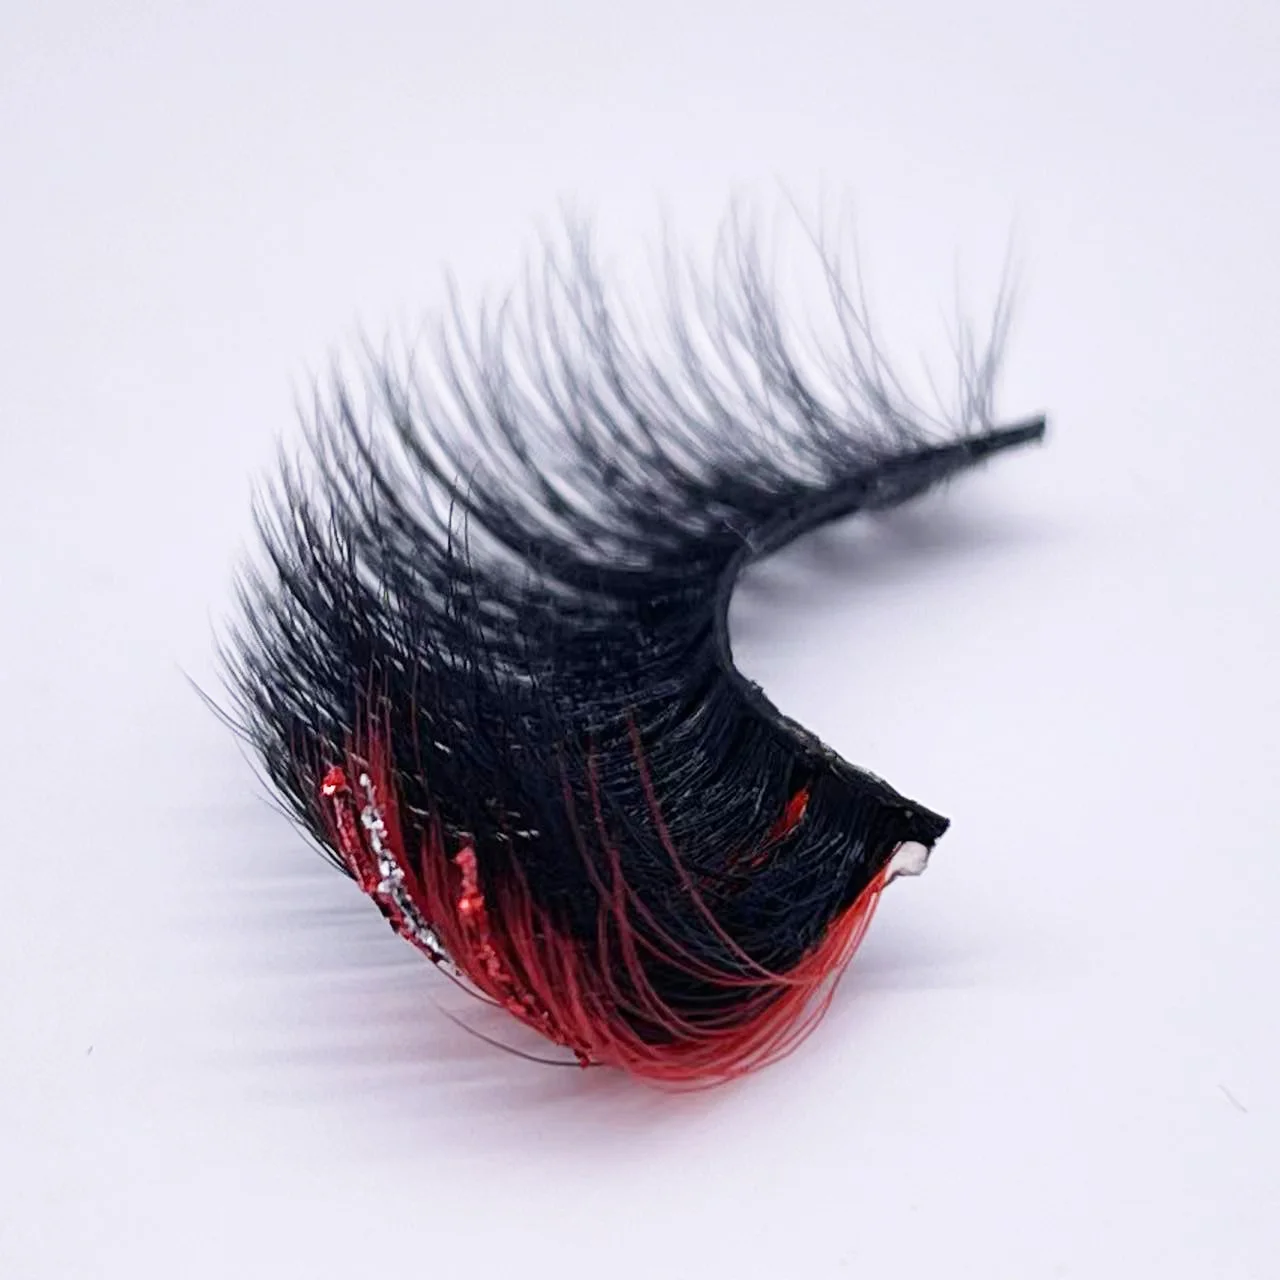 Hbzgtlad Colored Lashes Glitter Mink 15mm -20mm Fluffy Color Streaks Cosplay Makeup Beauty Eyelashes -Outlet Maid Outfit Store S06d39307f16d400e94c1544be4a00ef5p.jpg